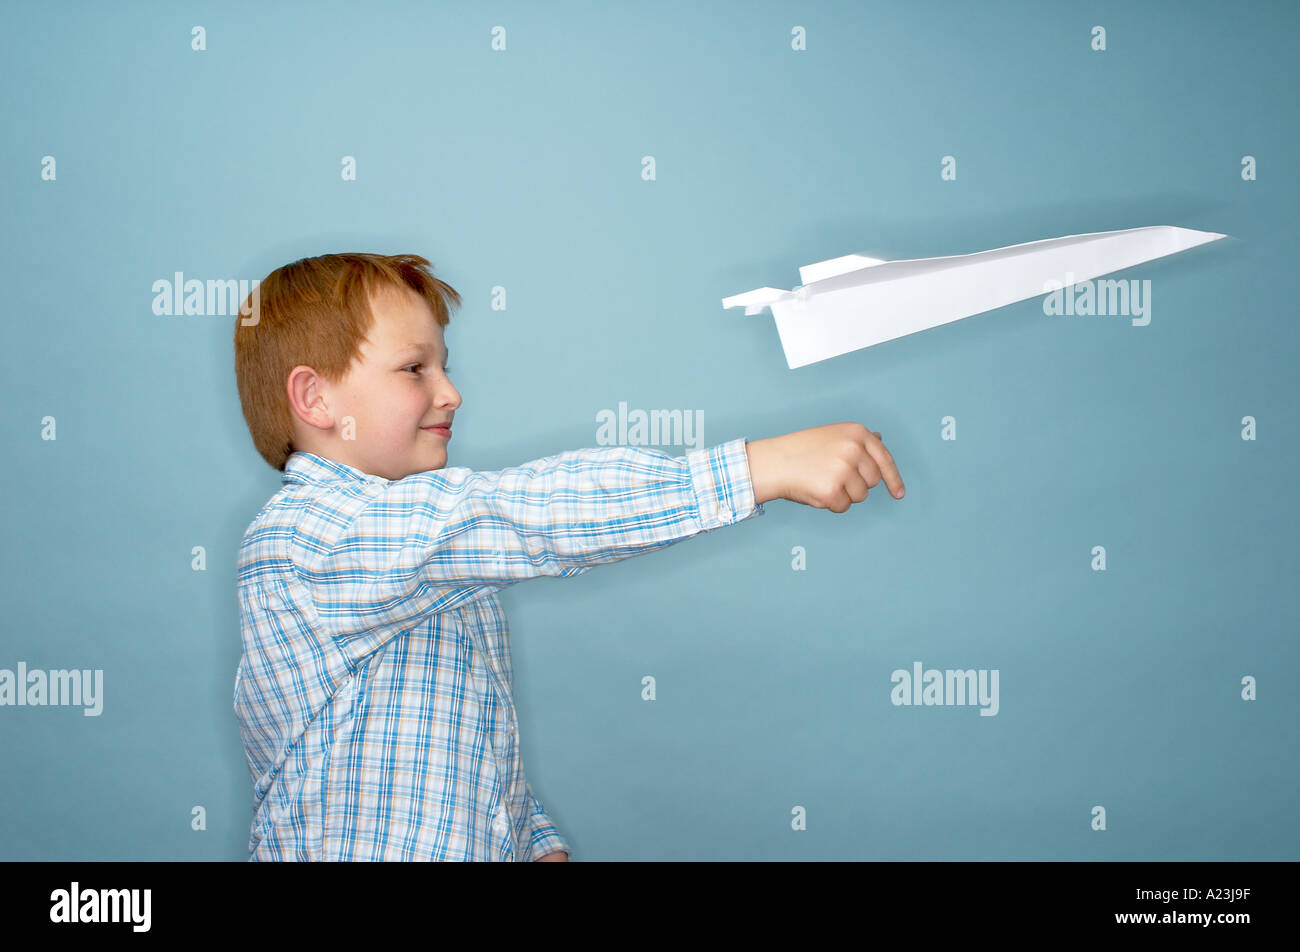 boy playing with paper plane Stock Photo